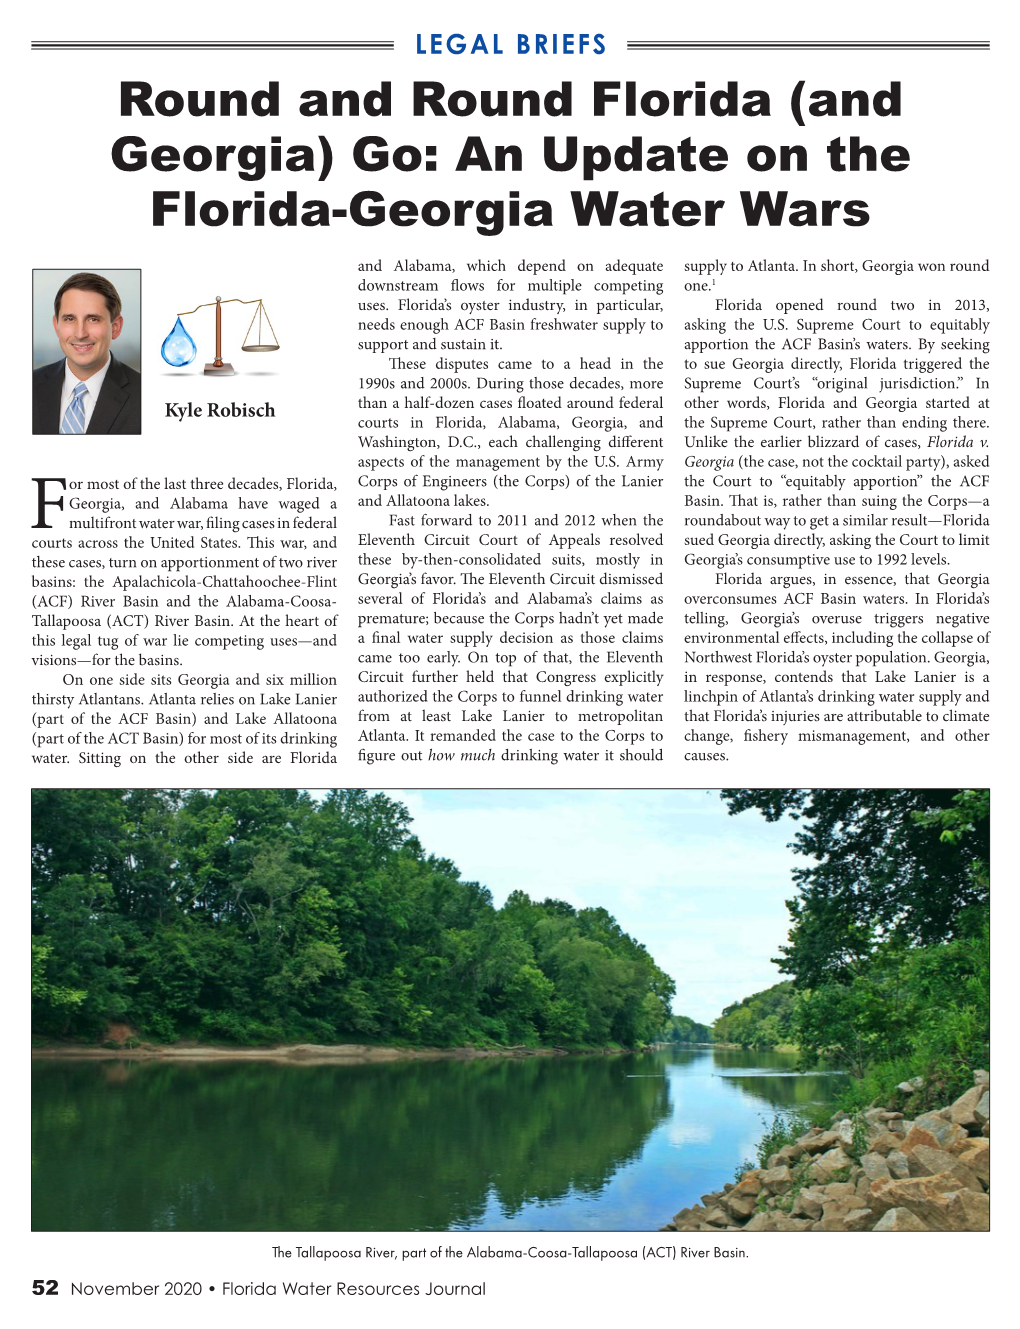 Go: an Update on the Florida-Georgia Water Wars